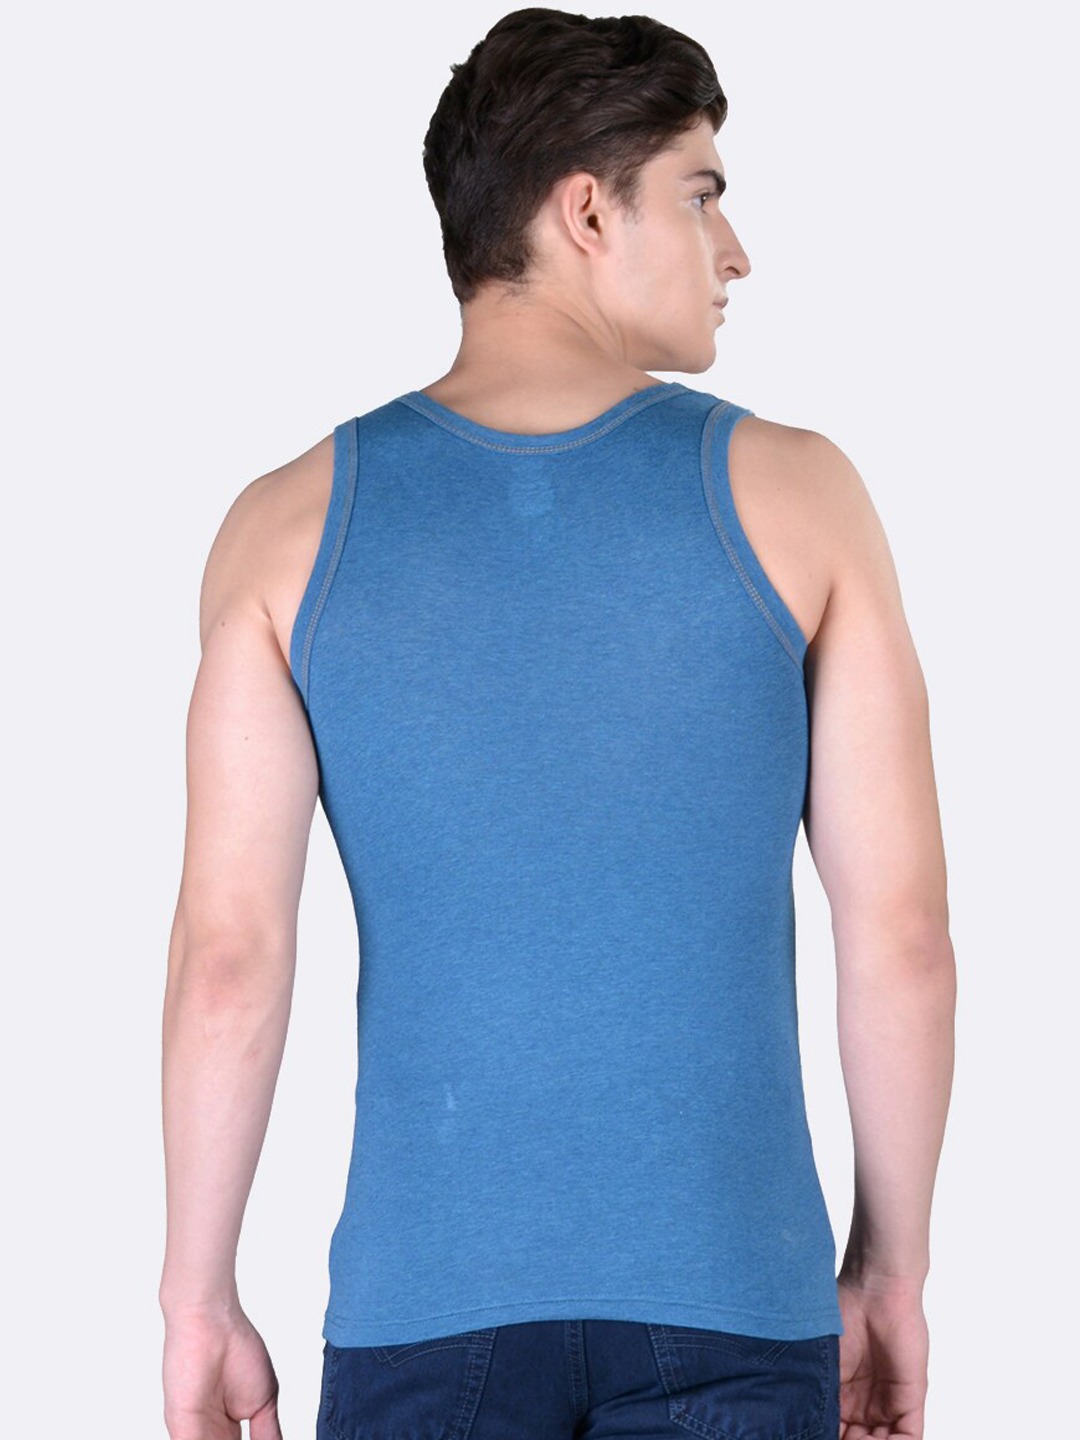 Clothing Innerwear Vests | Force NXT Men Pack Of 3 Assorted Cotton Innerwear Vests - NP16764